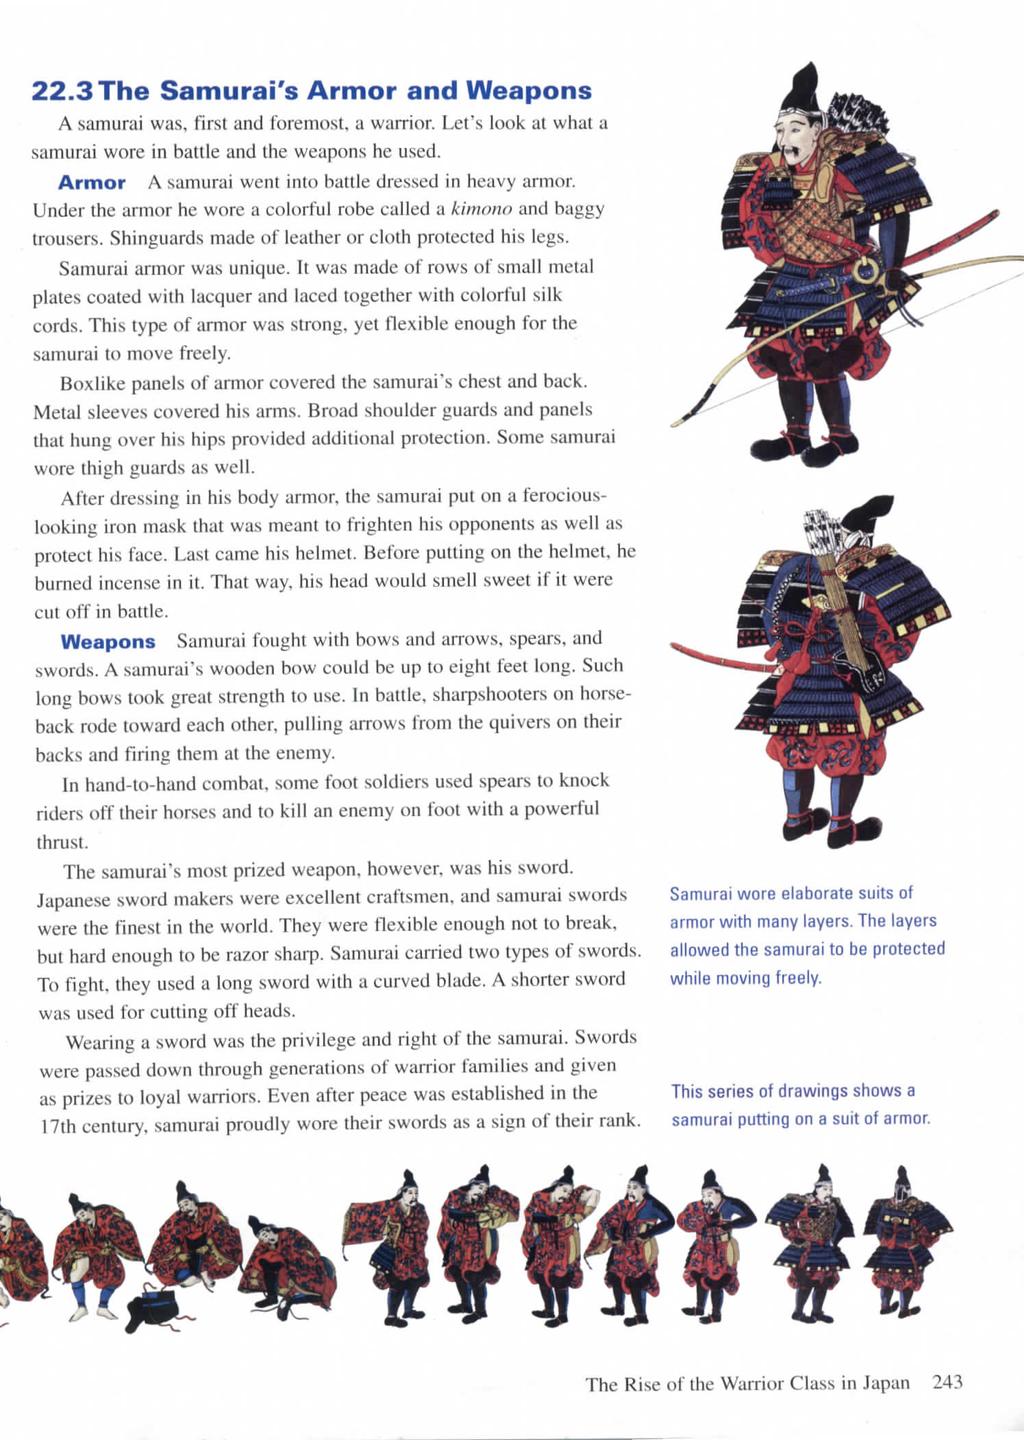 22.3 The Samurai's Armor and Weapons A samurai was, first and foremost, a warrior. Let's look at what a samurai wore in battle and the weapons he used.